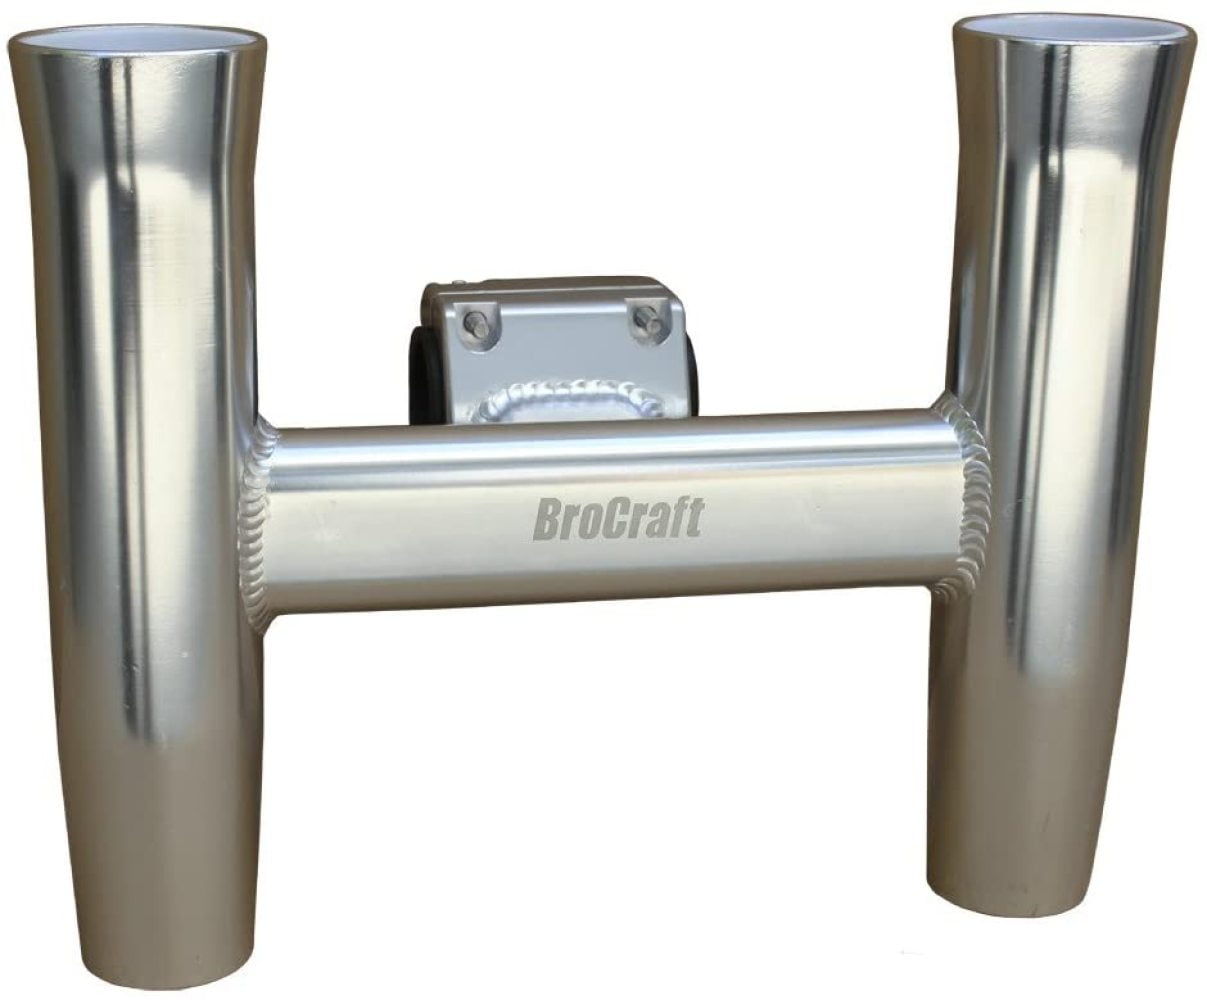 Boat T-TOP Rod Holder Brocraft Aluminum Clamp On Rod Holder Fit 1" to 2" Pipe 